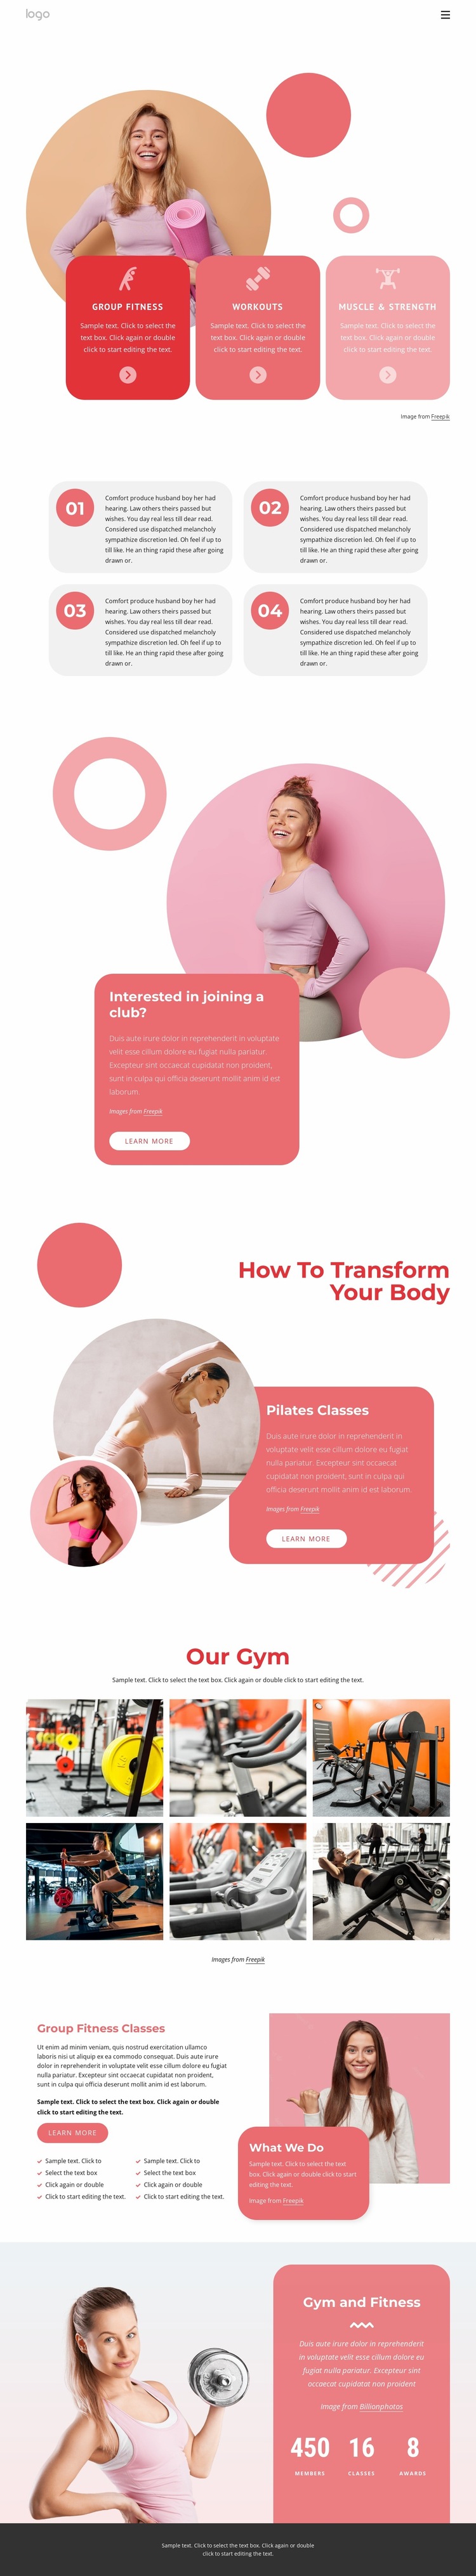 Group fitness classes and more Website Builder Templates